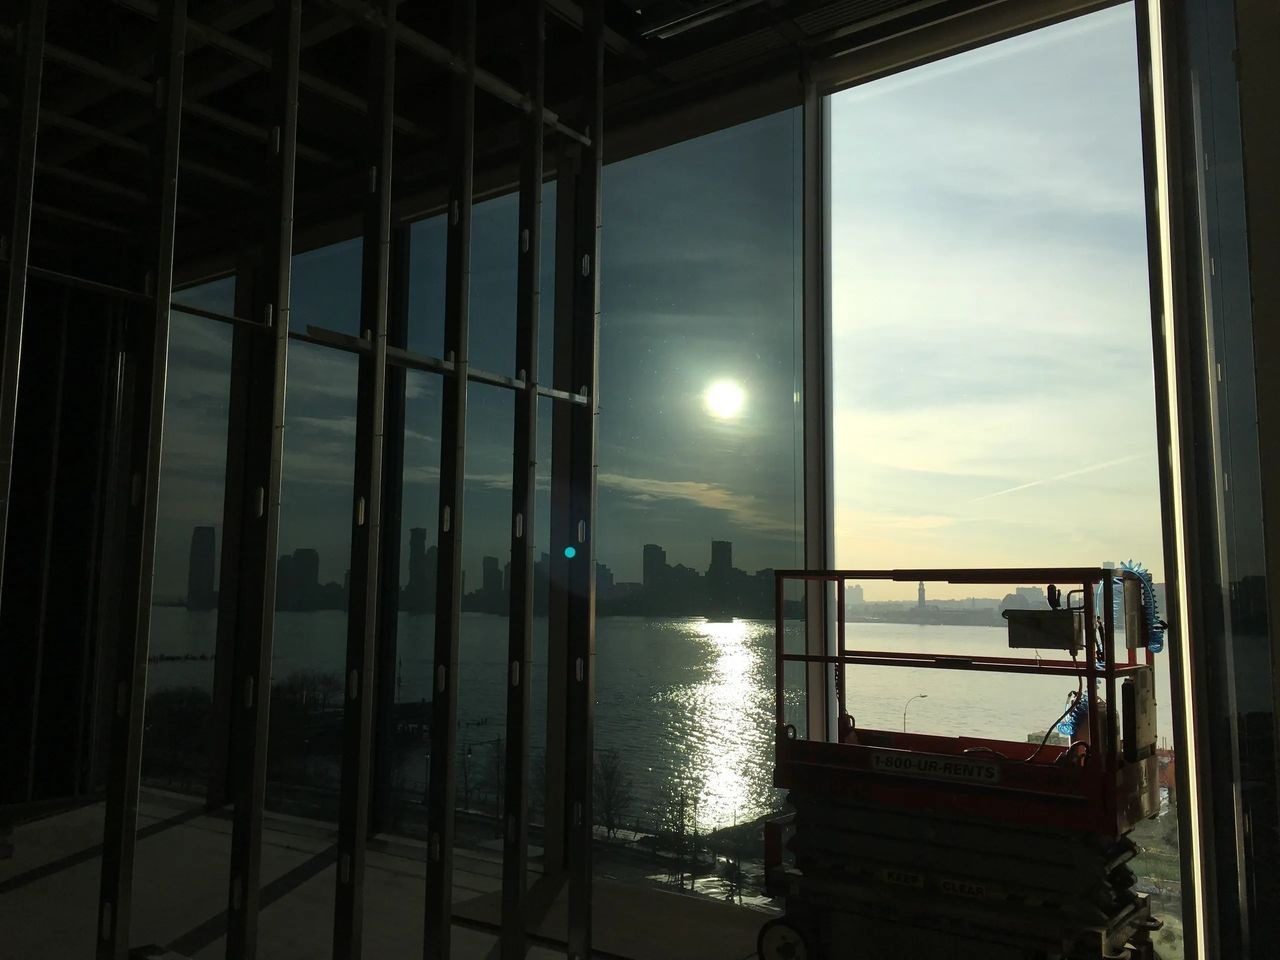 A view of the sun from inside a building.